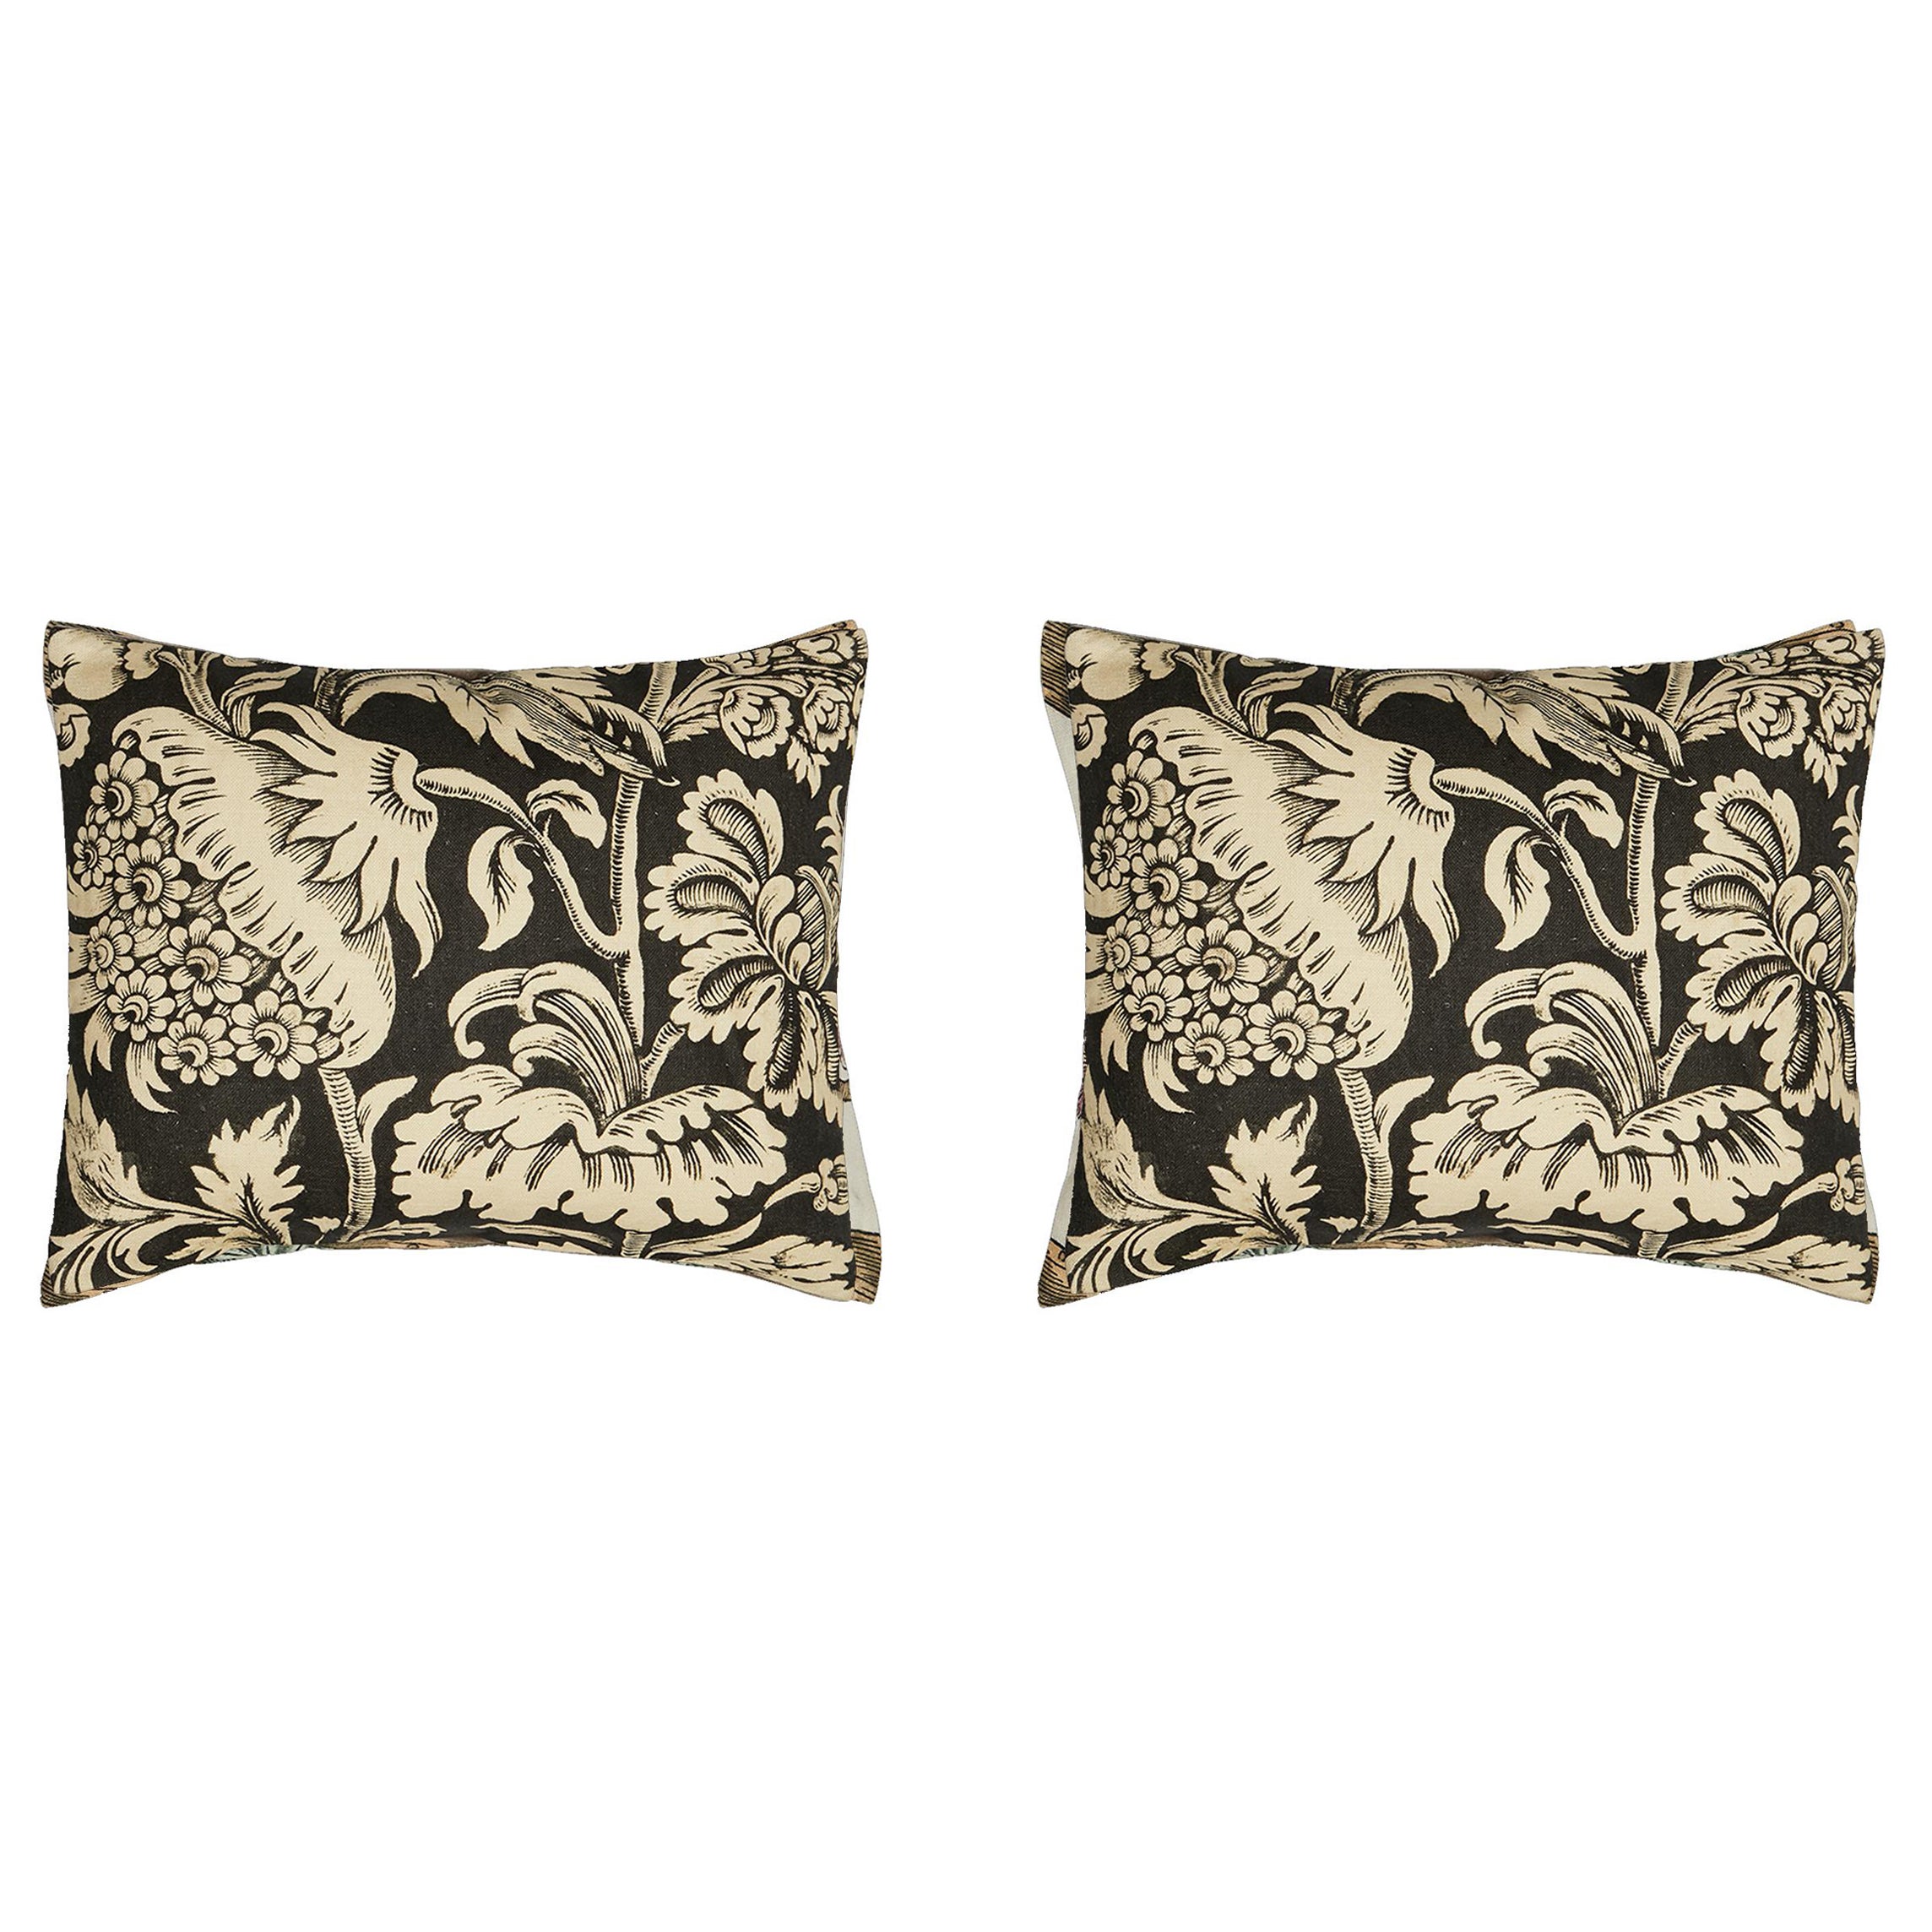 Pair of 12 x 16 Linen Pillows - Black White Grand Pavots pattern - Made in Paris For Sale